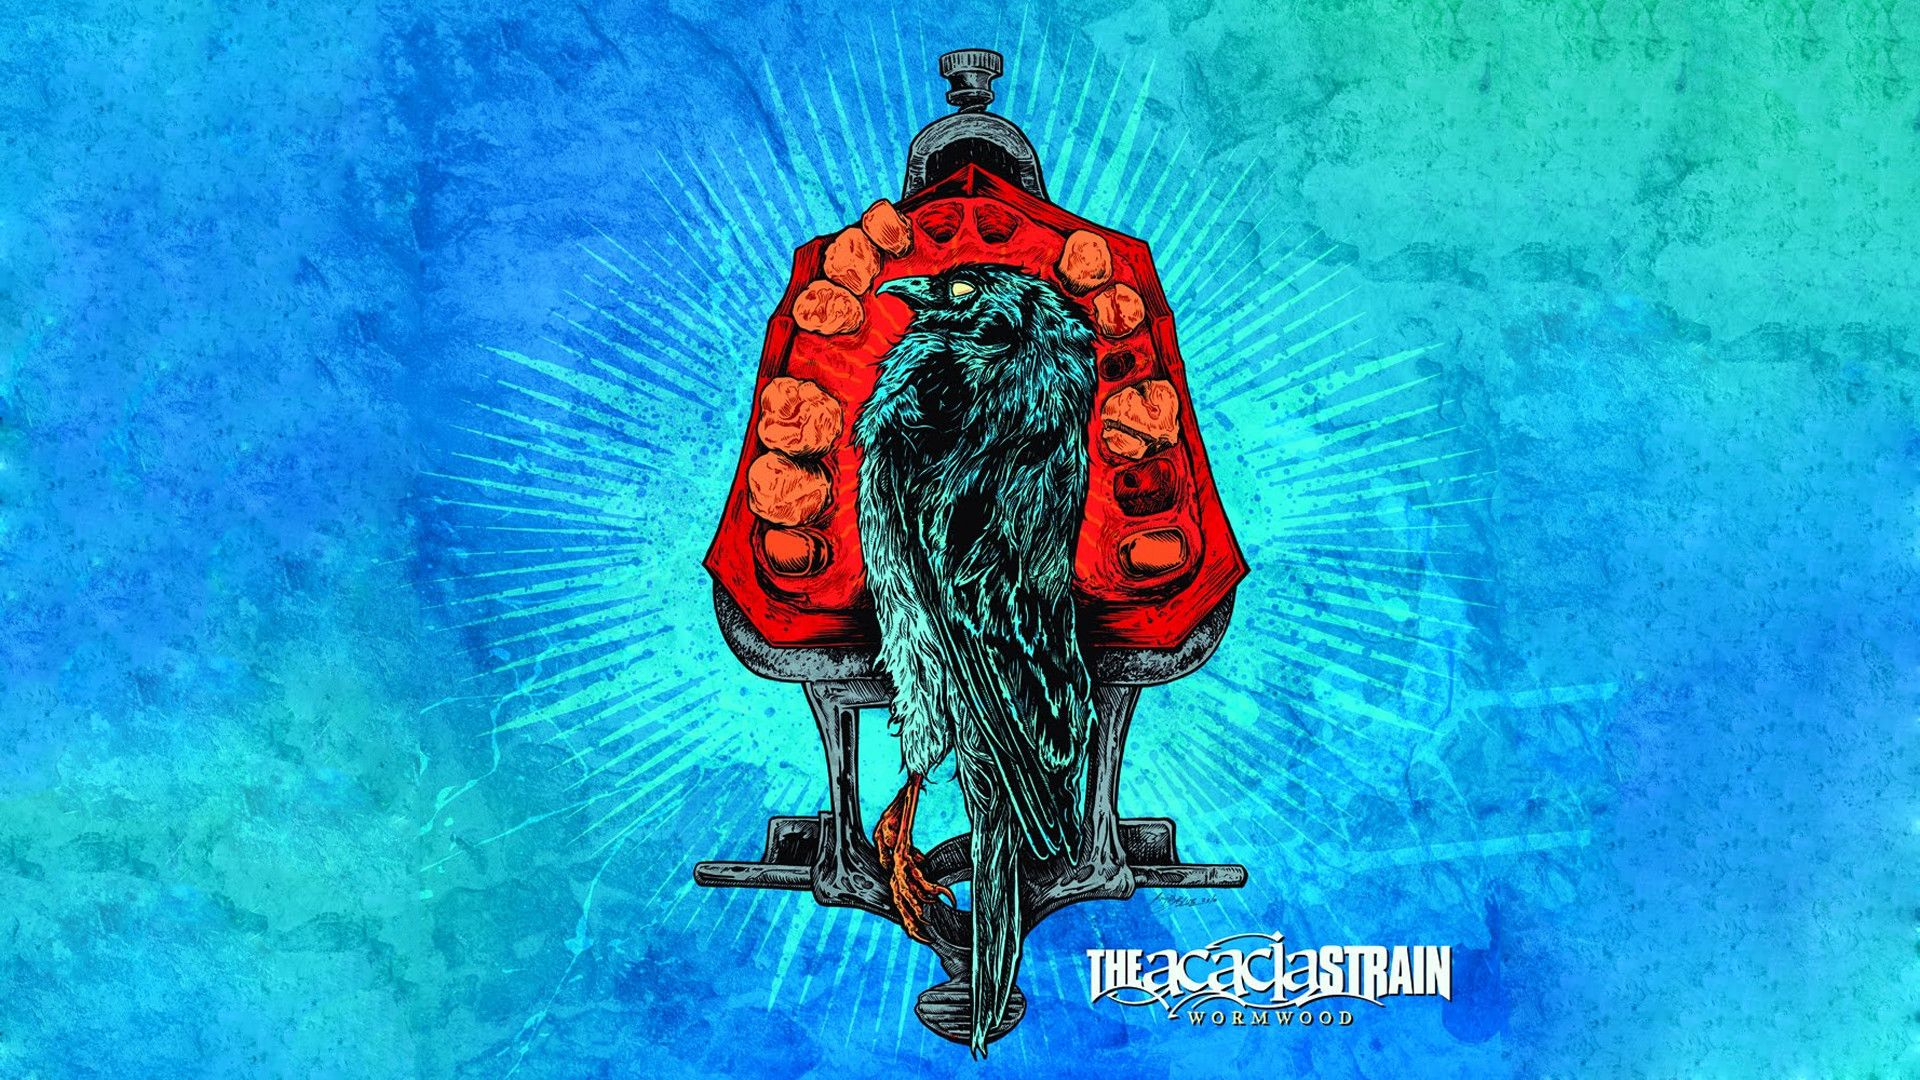 1920x1080 The Acacia Strain Wallpapers Top Free The Acacia Strain Backgrounds